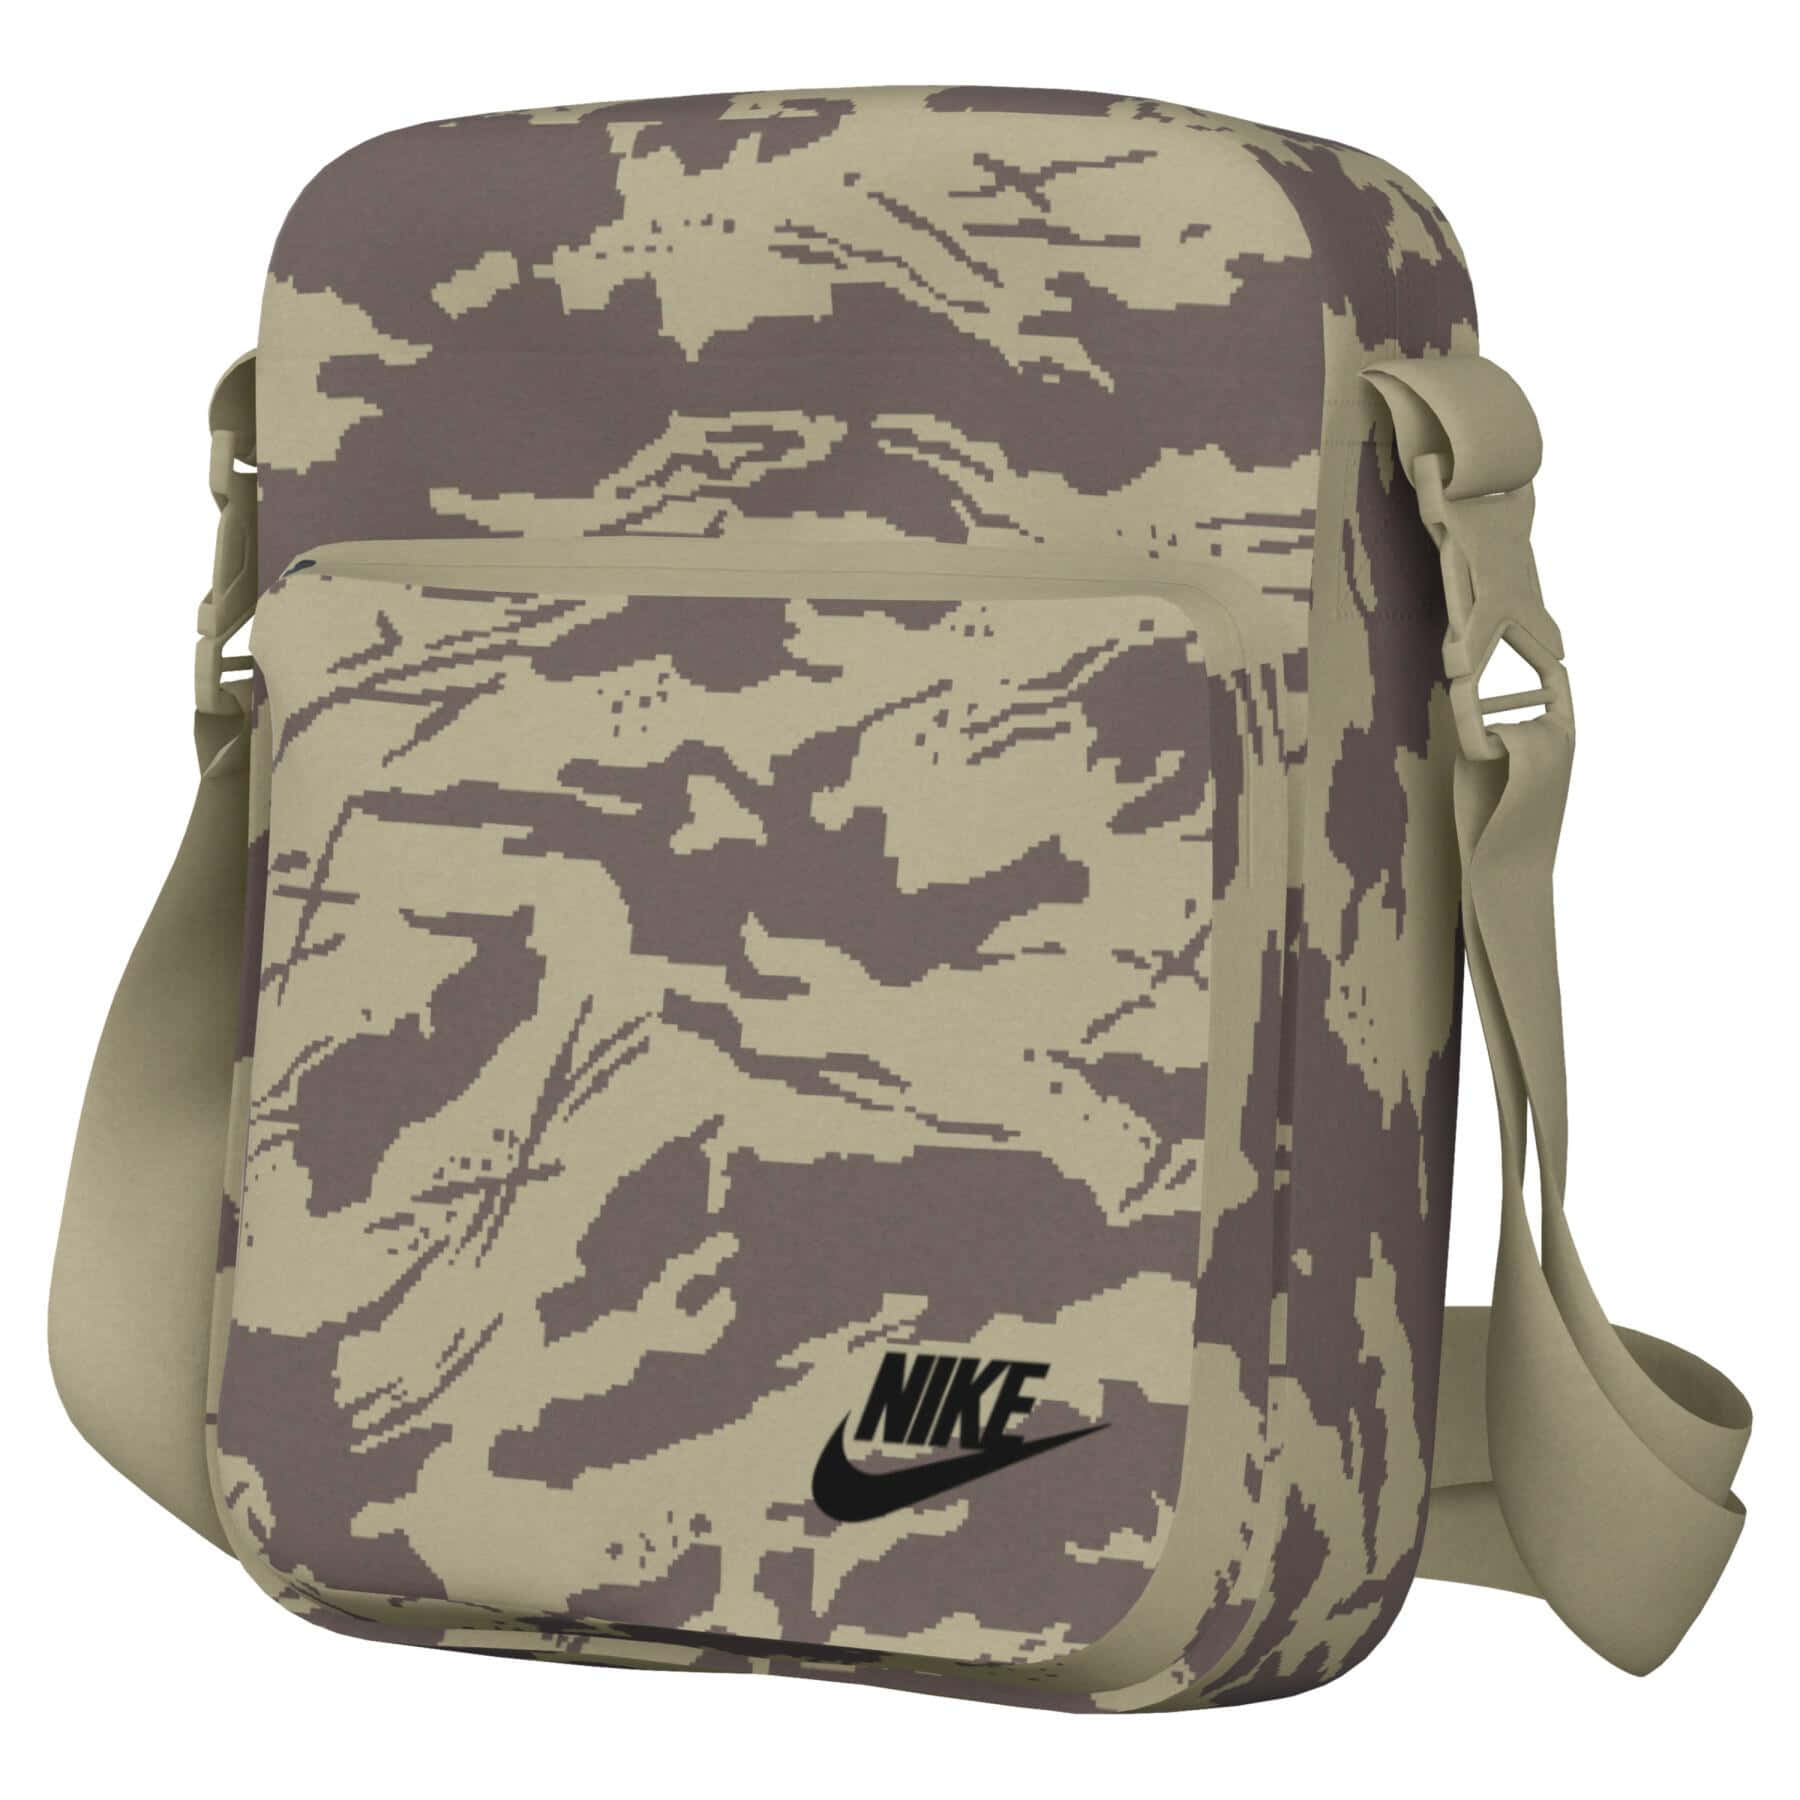 Get camouflaged with the latest camo styles